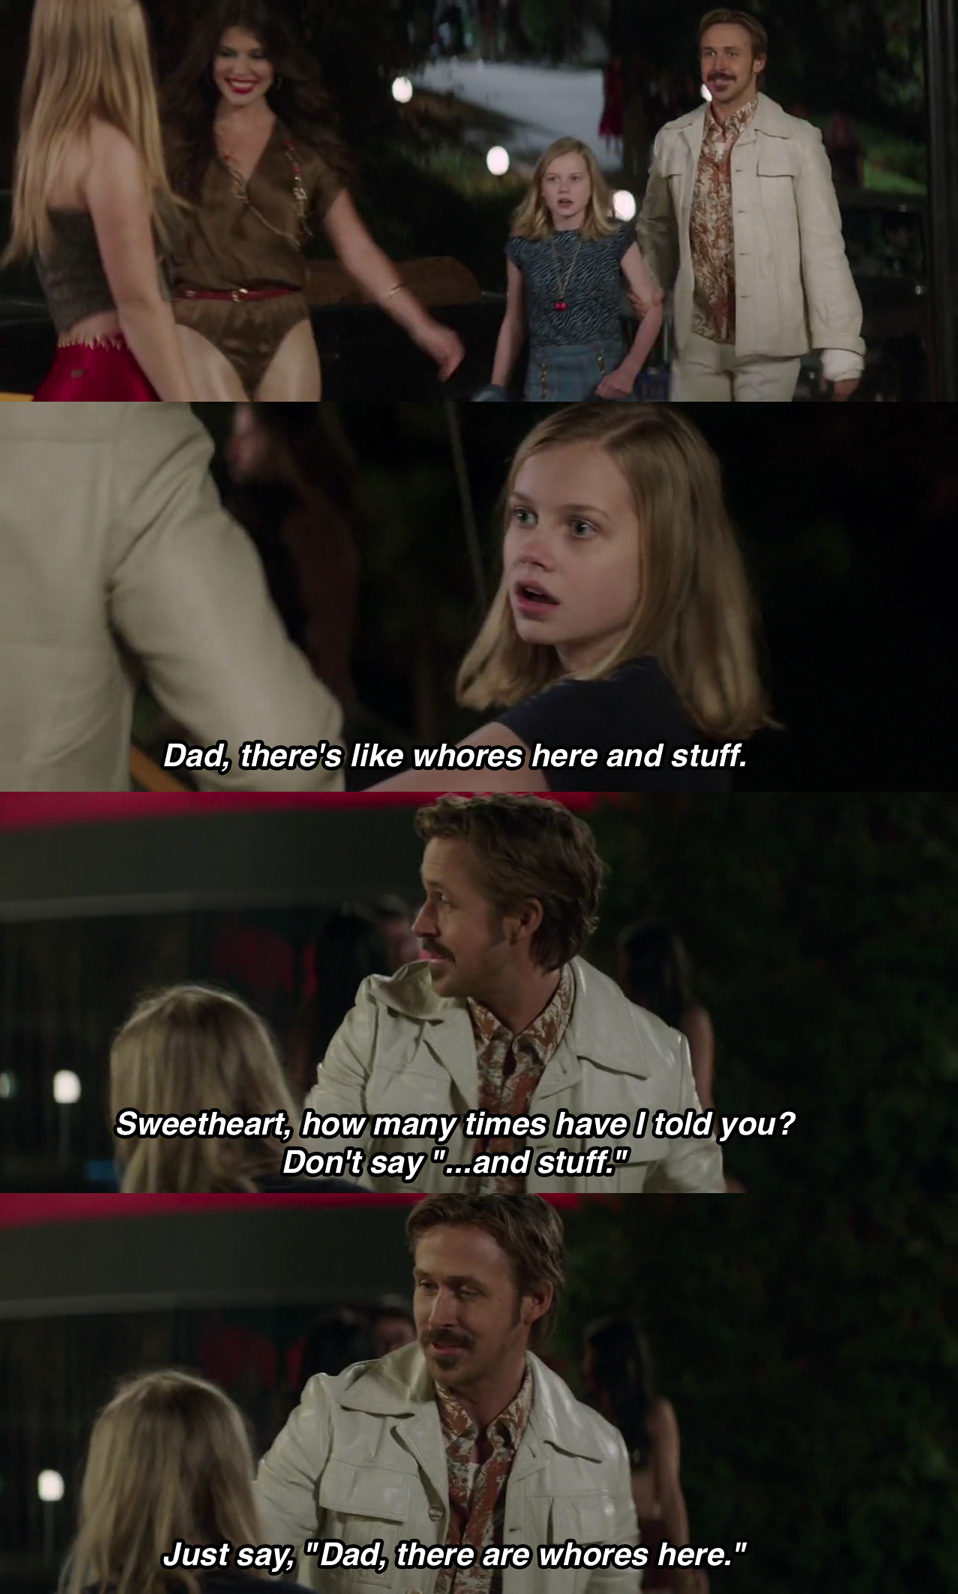 funny memes in english movies - Dad, there's whores here and stuff. Sweetheart, how many times have I told you? Don't say "...and stuff." Just say, "Dad, there are whores here."